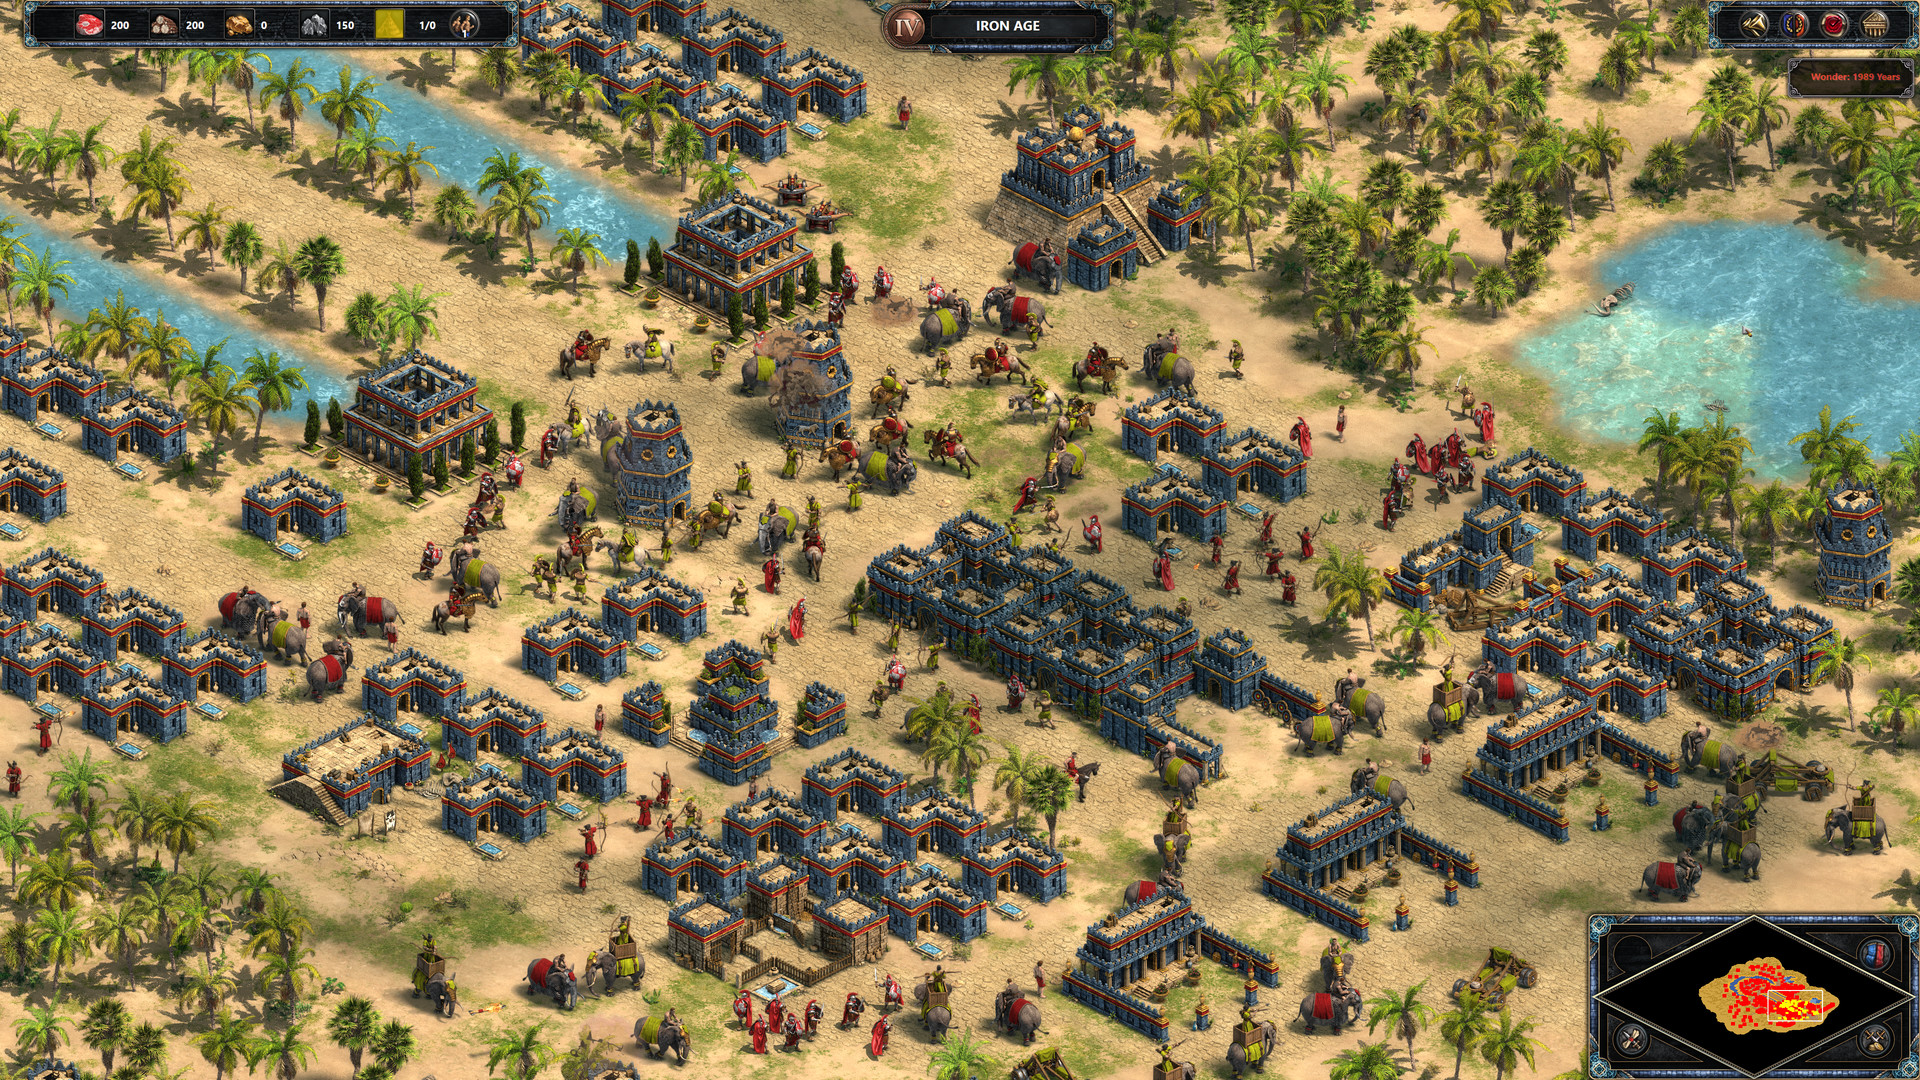 Find the best computers for Age of Empires